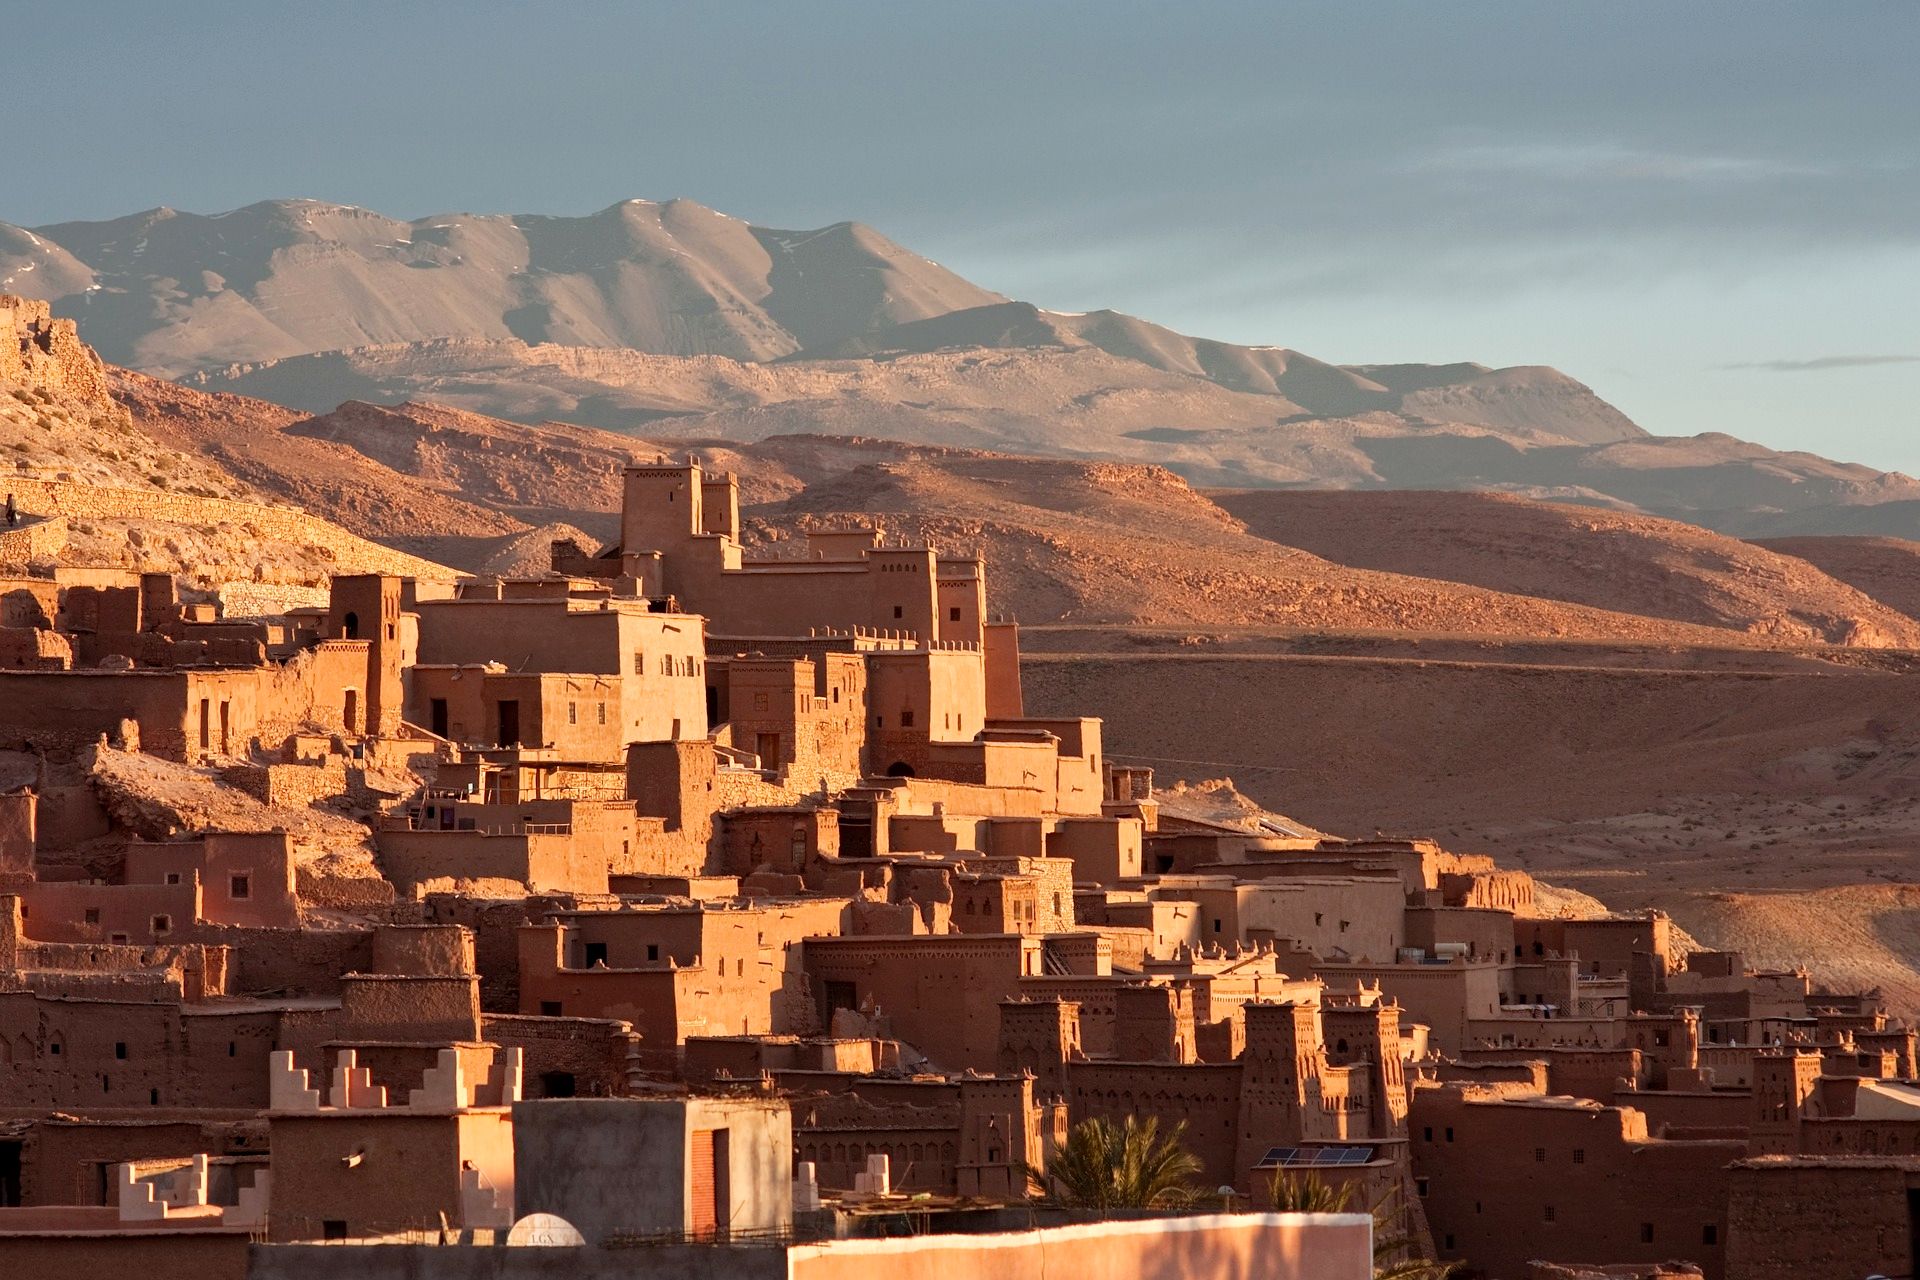 Experience the culture of Morocco